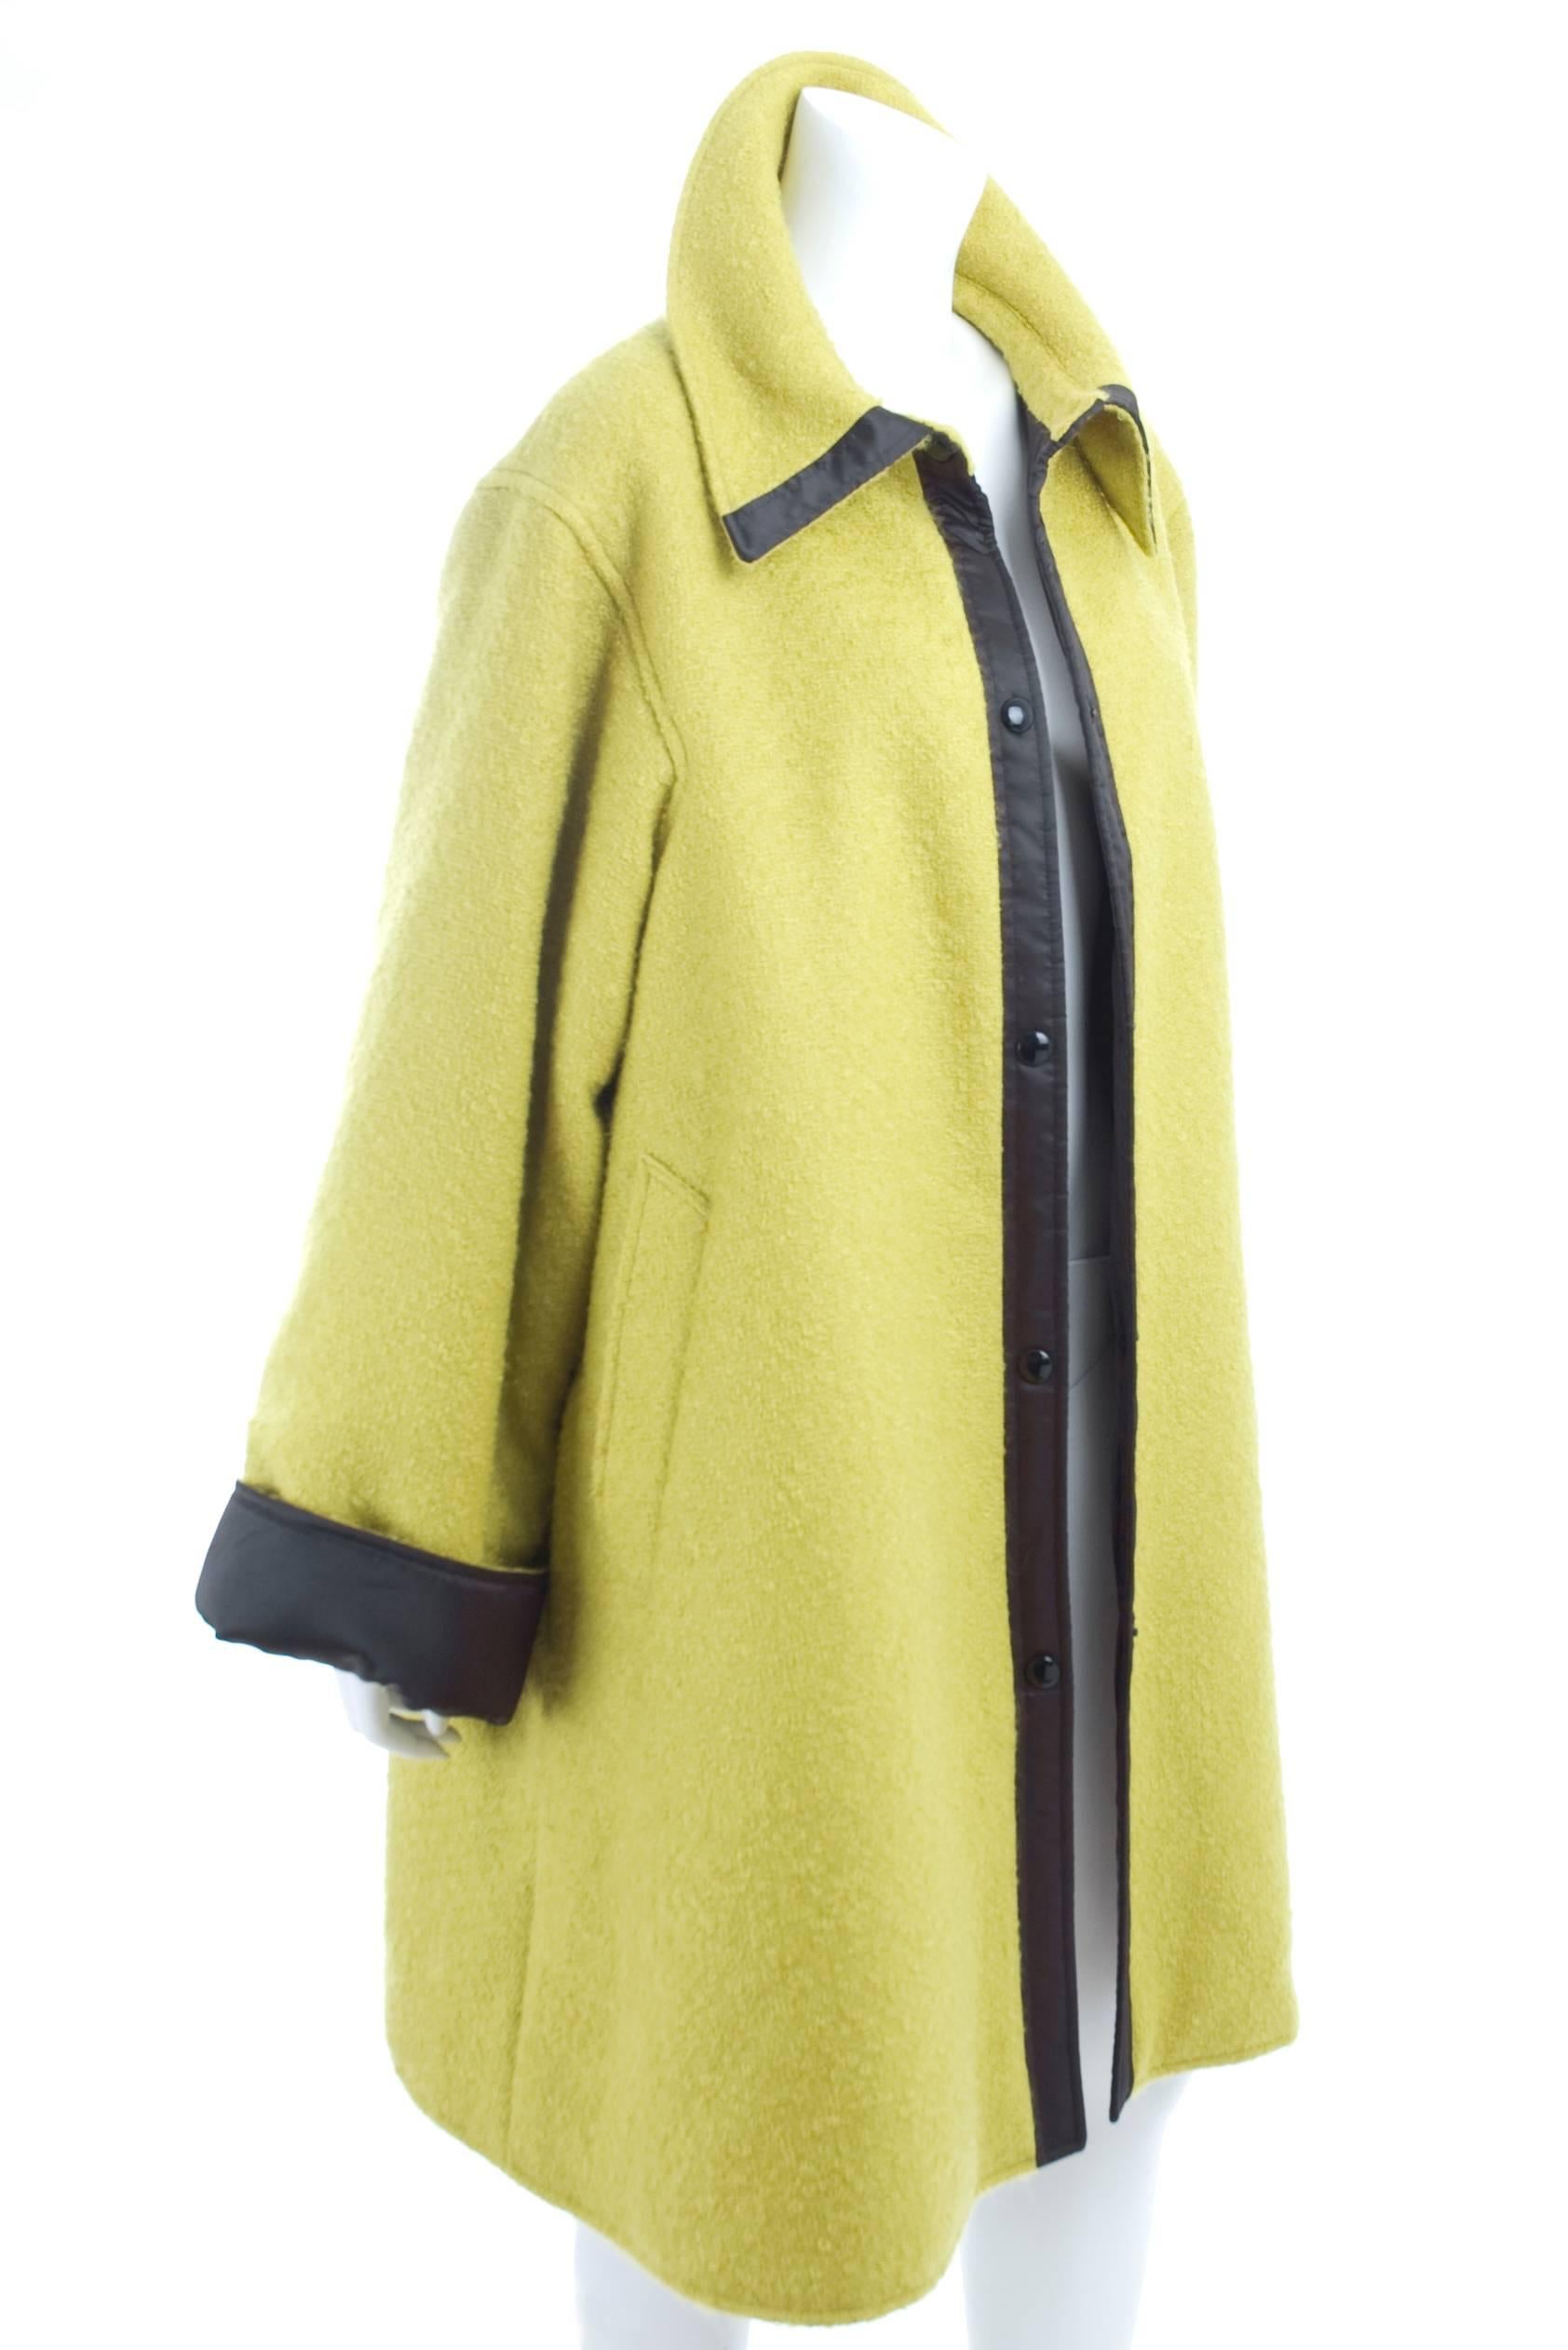 Vintage State Of Claude Montana Coat in Lime Green sz.12 For Sale 1